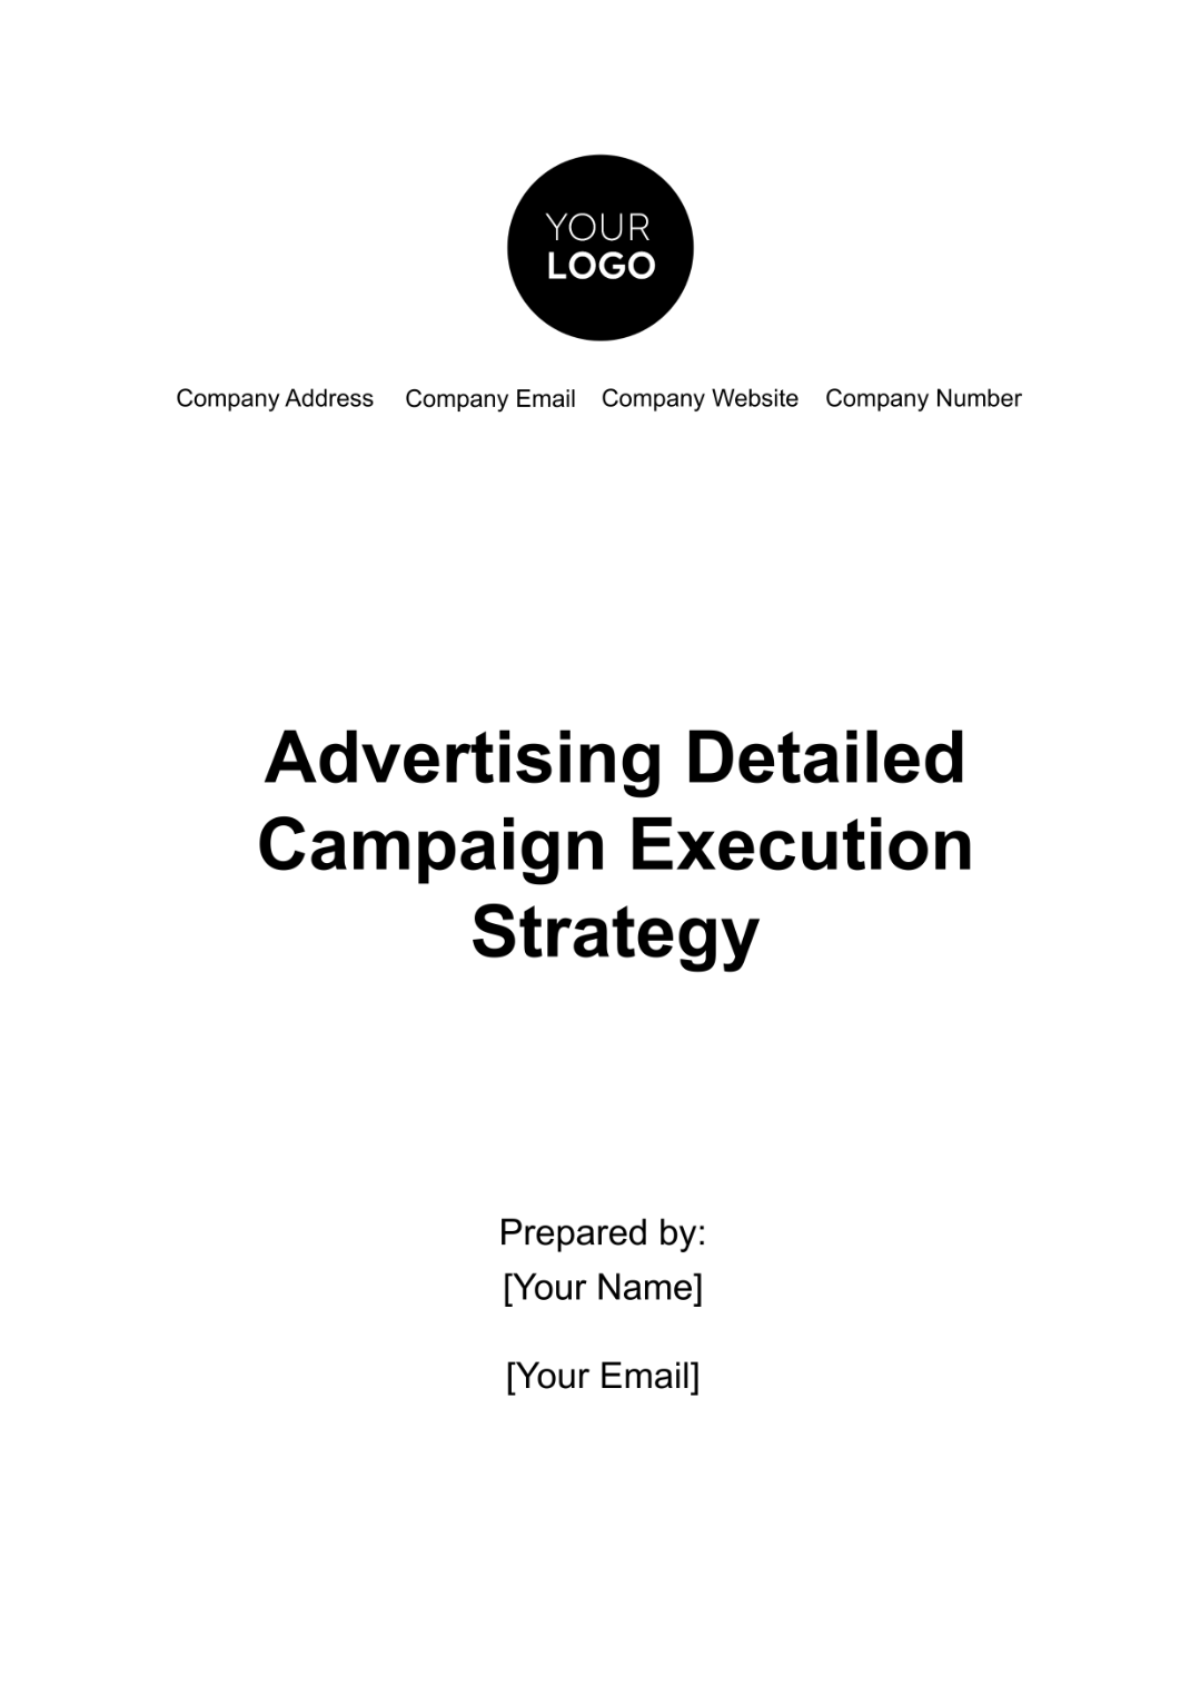 Advertising Detailed Campaign Execution Strategy Template